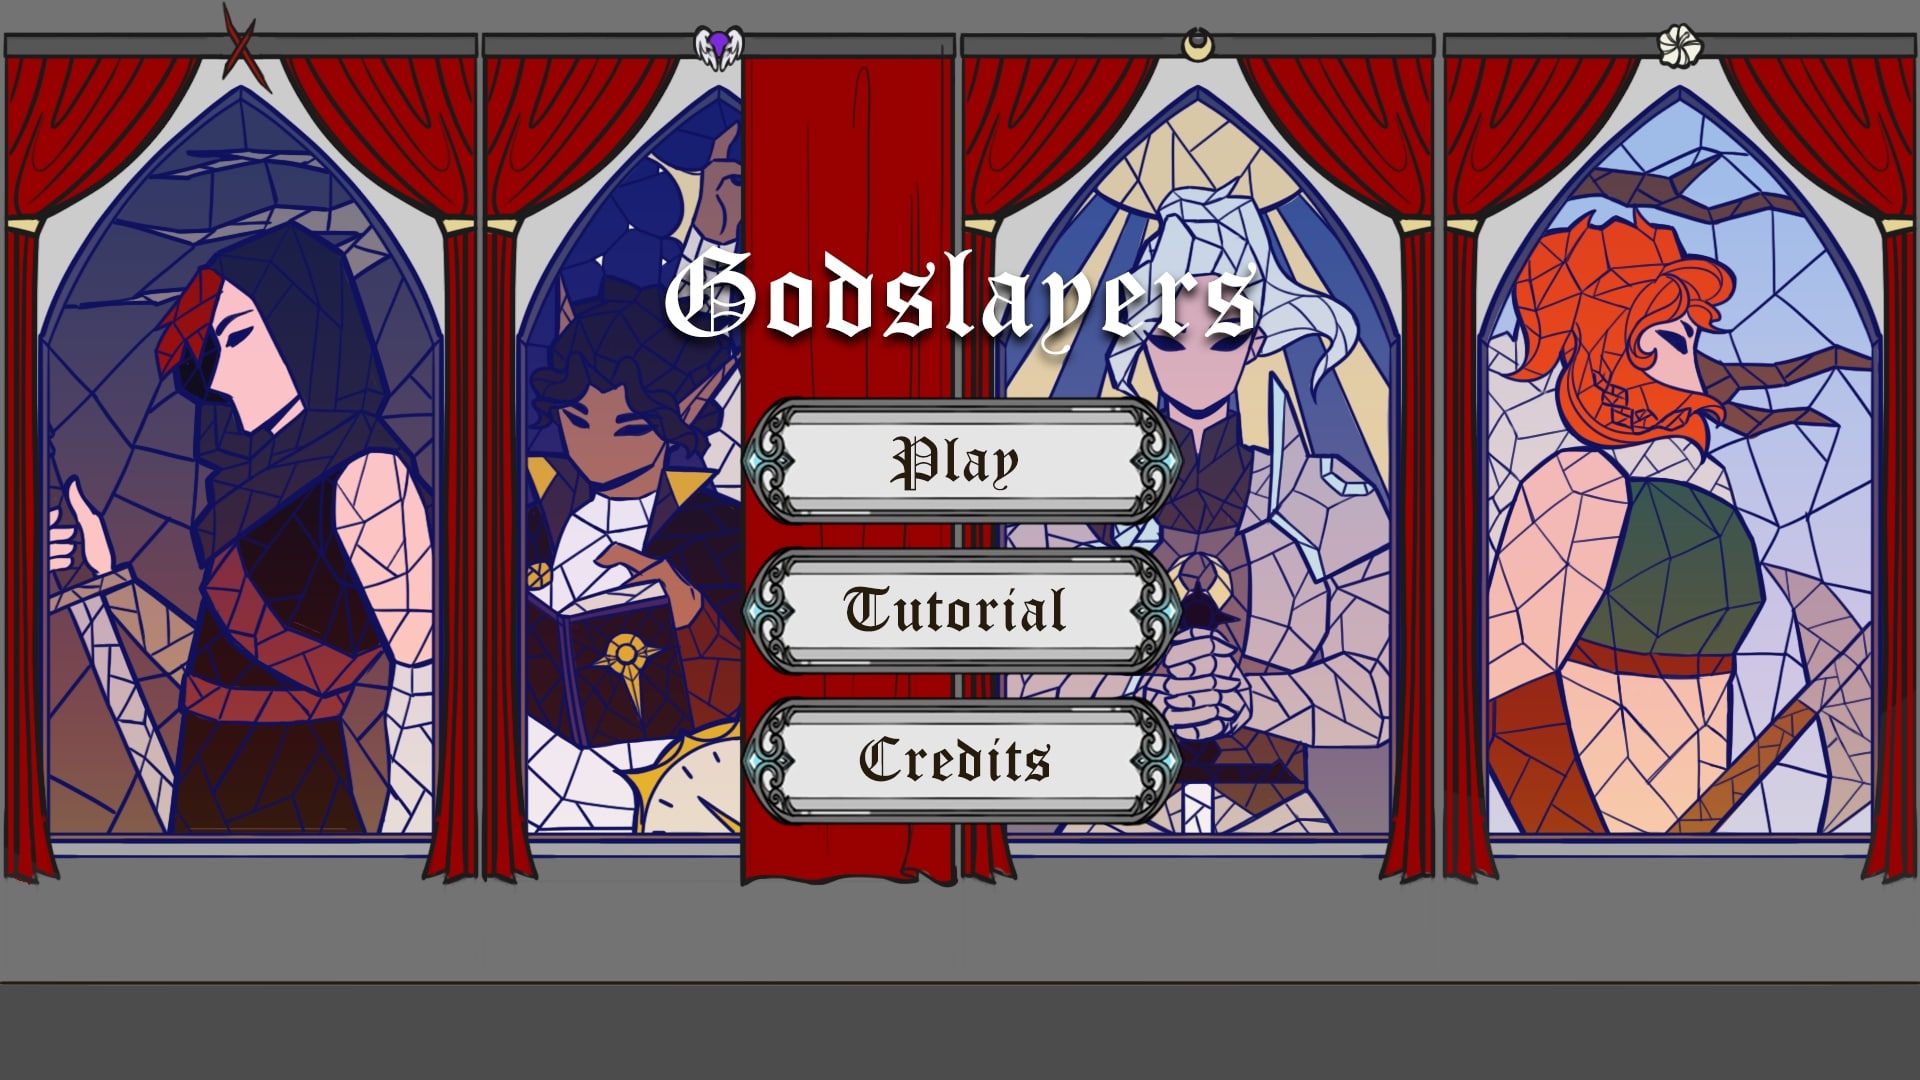 Title Screen for game. Inspo: Cathedral stained glass windows to foreshadow the location of the battle.